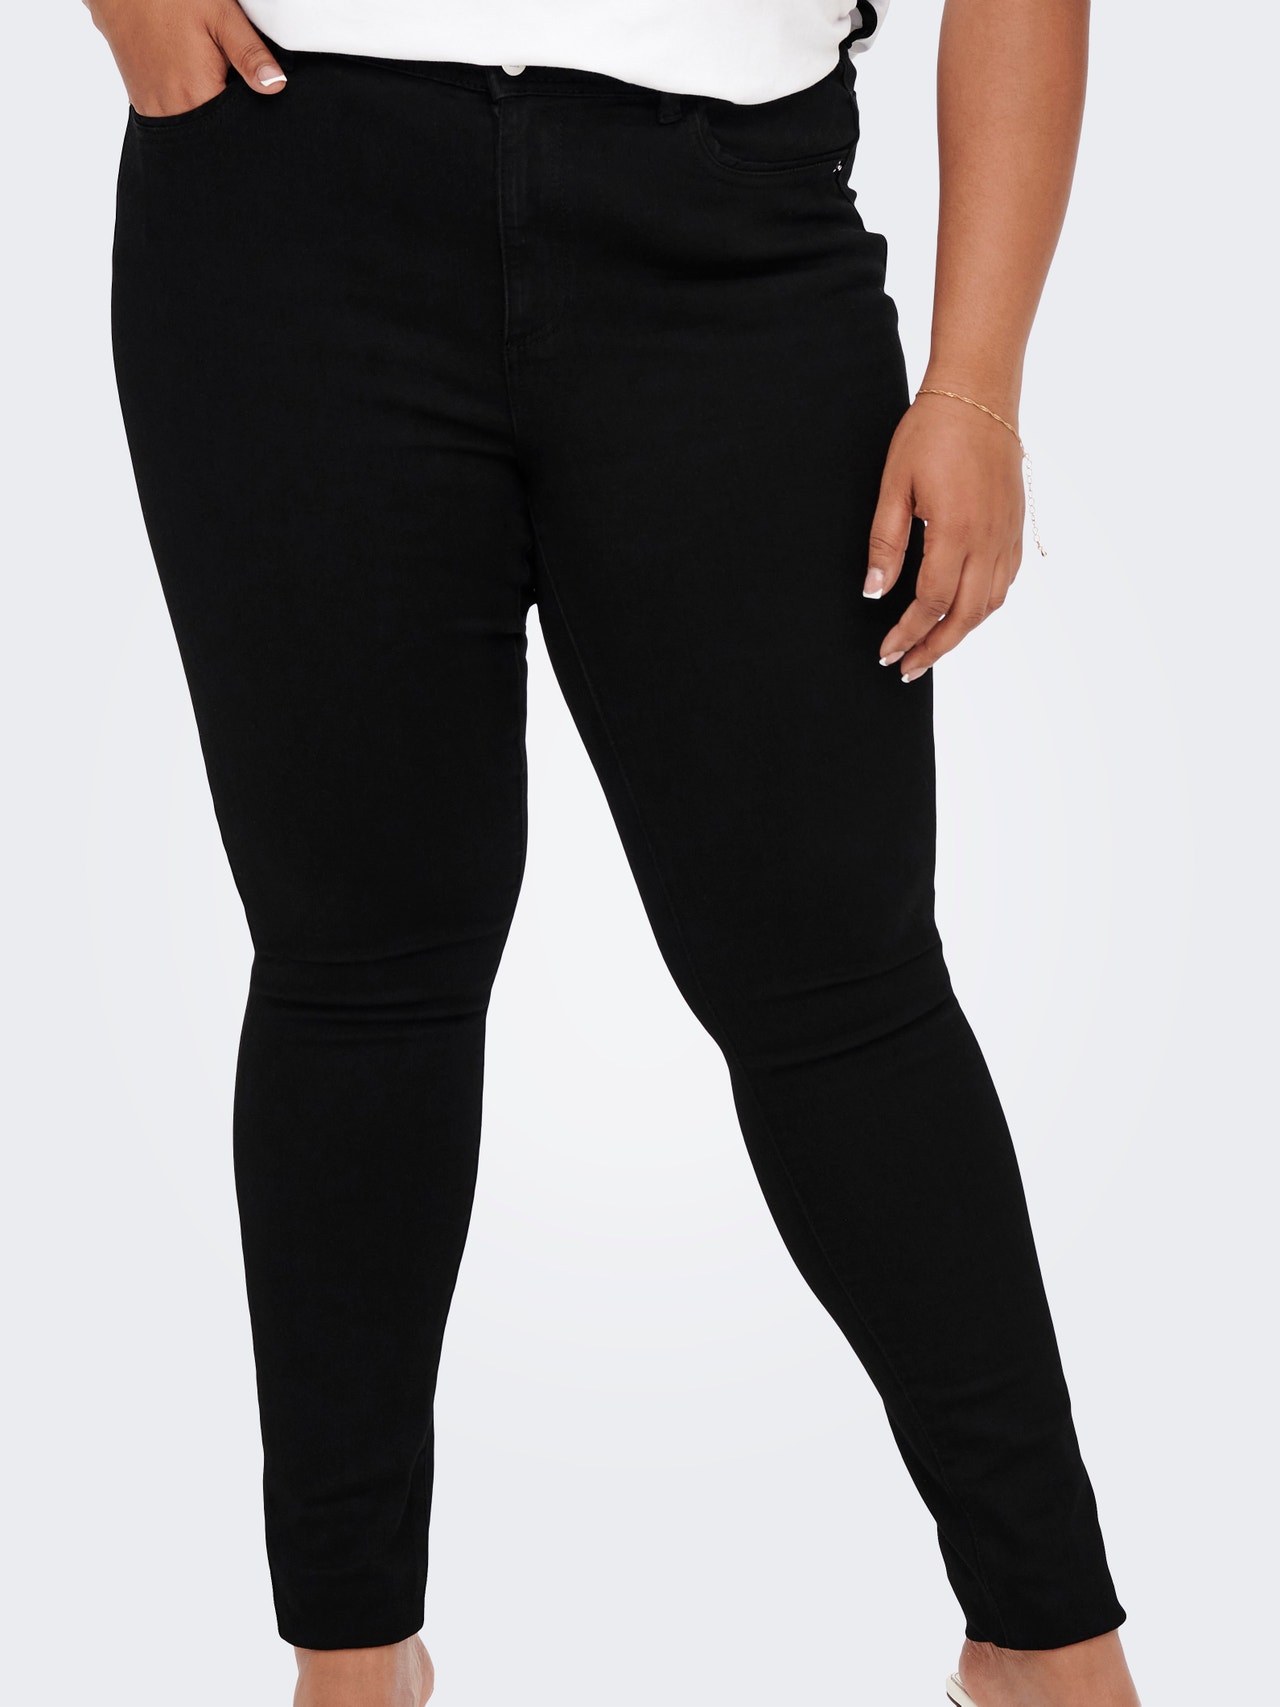 ONLY Curvy CARSally - À taille classique Jean skinny -Black Denim - 15263091